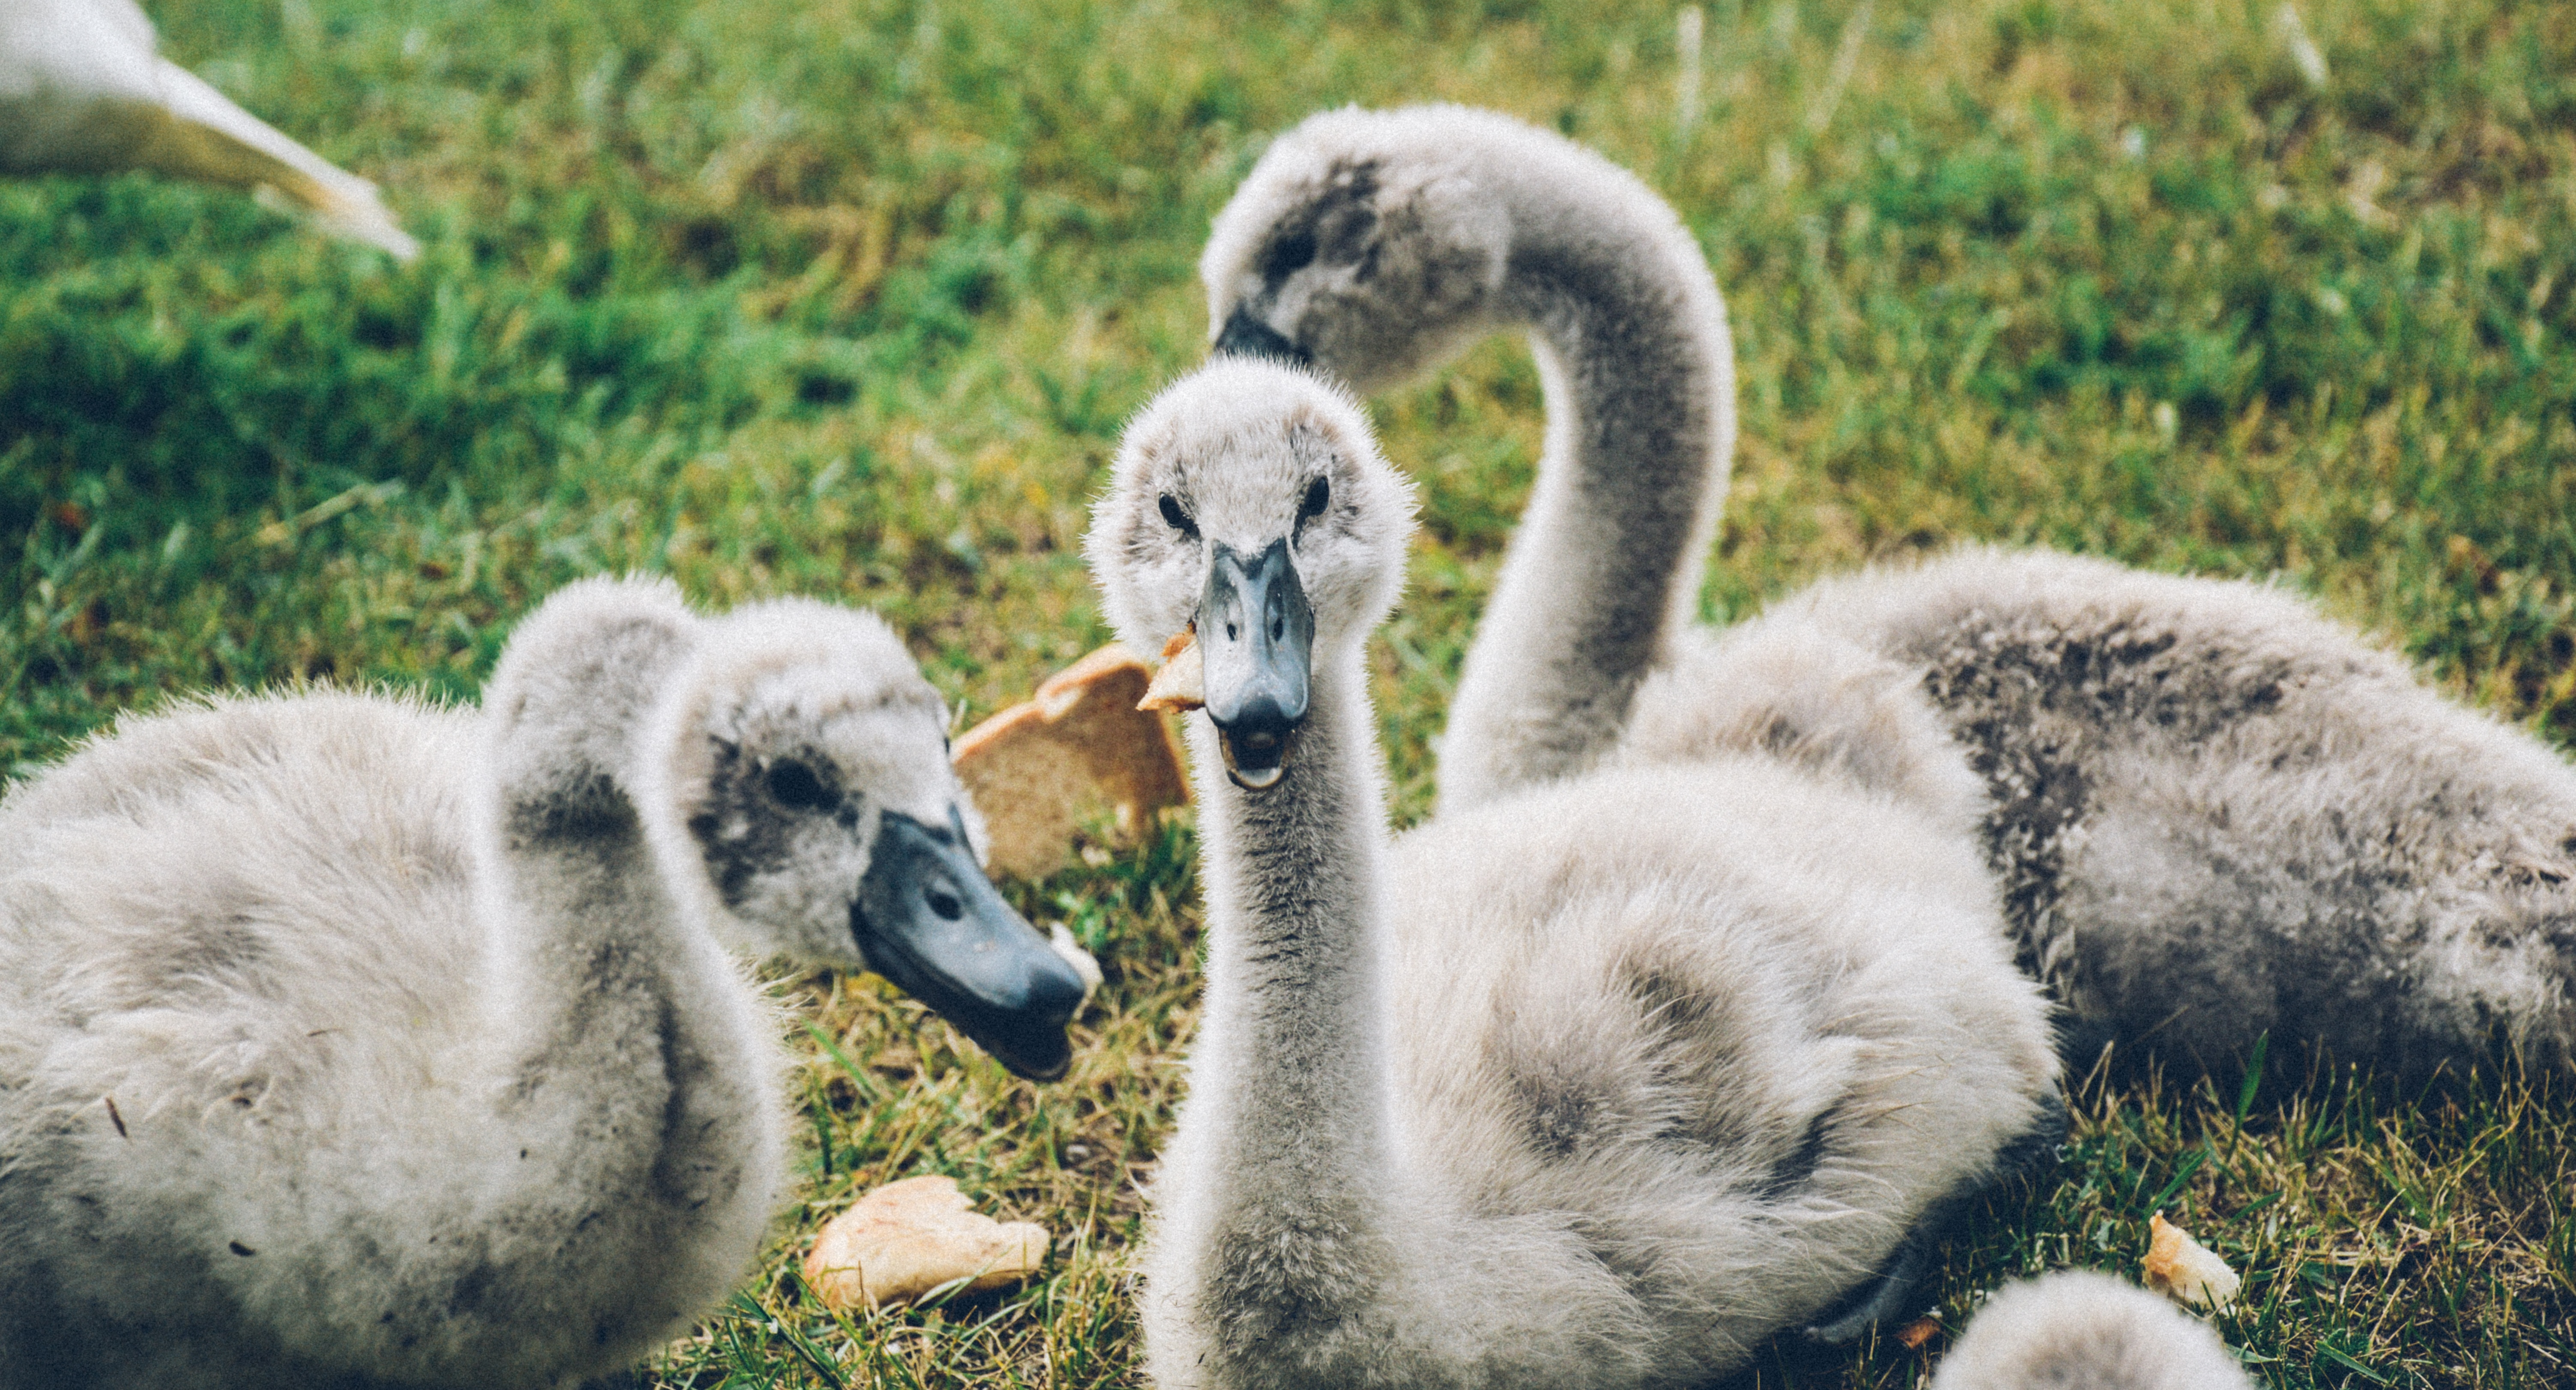 three gray young swans on grassy land